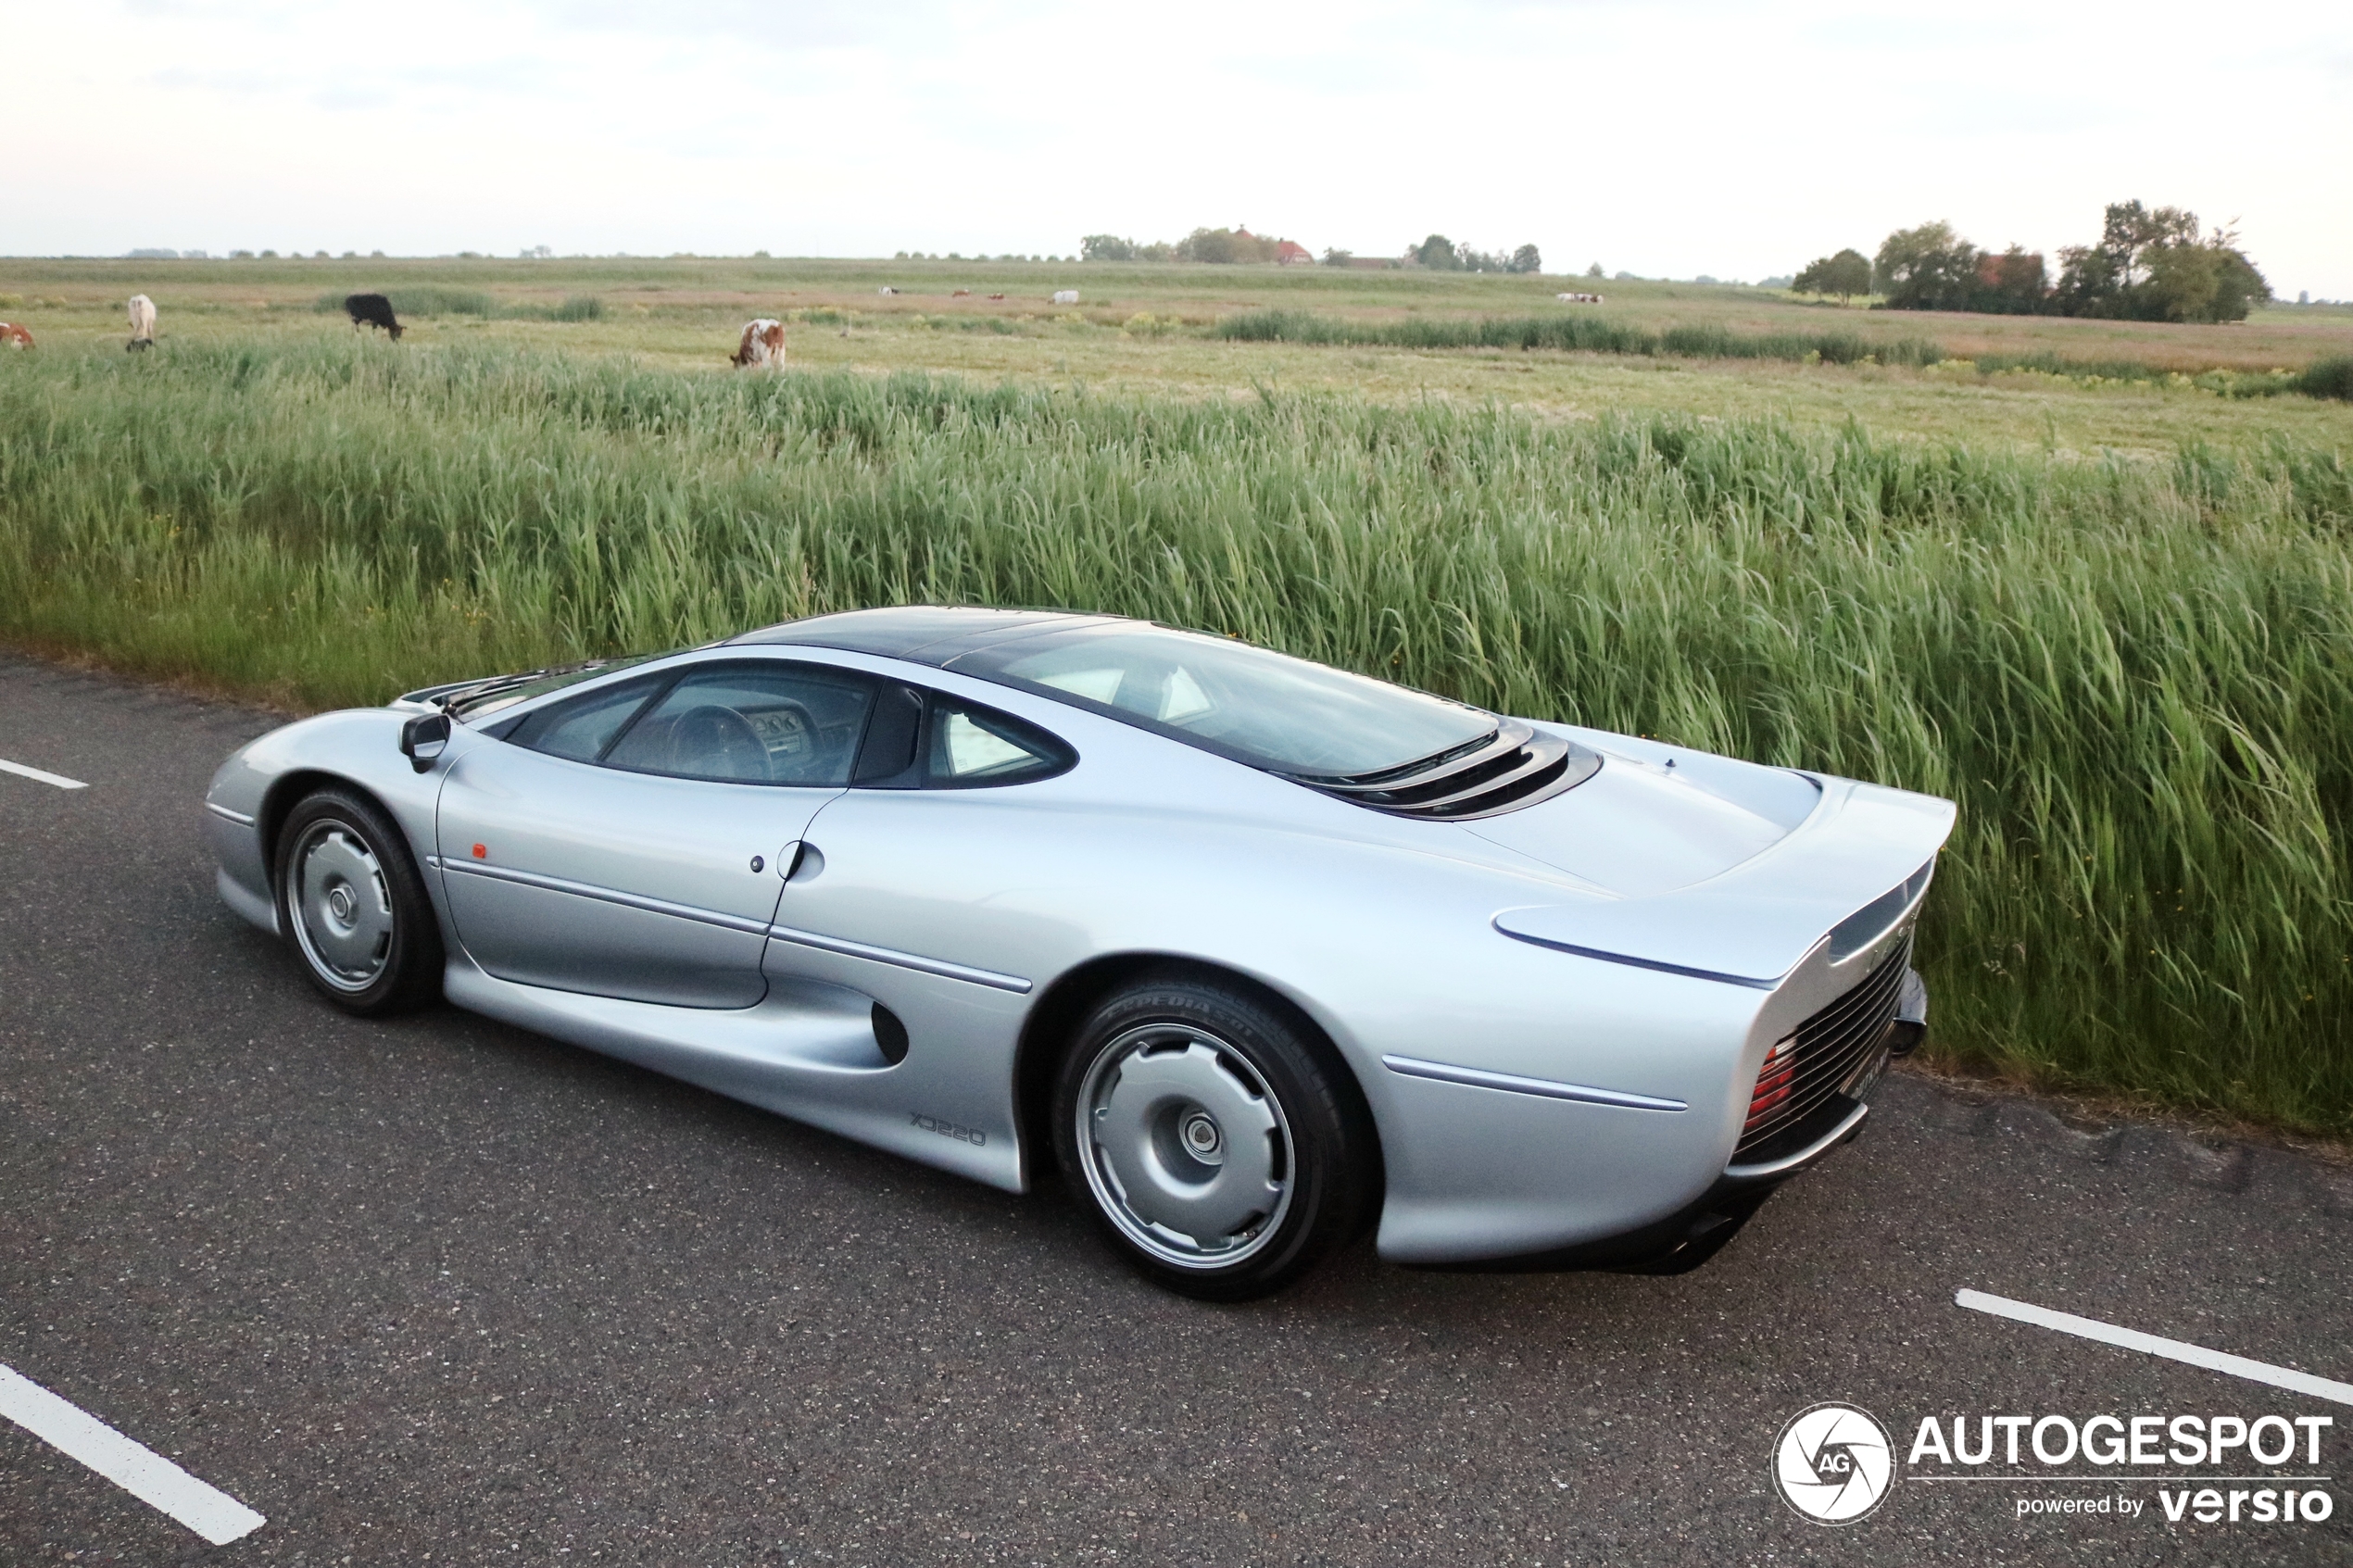 Stunning images of an XJ220 emerge